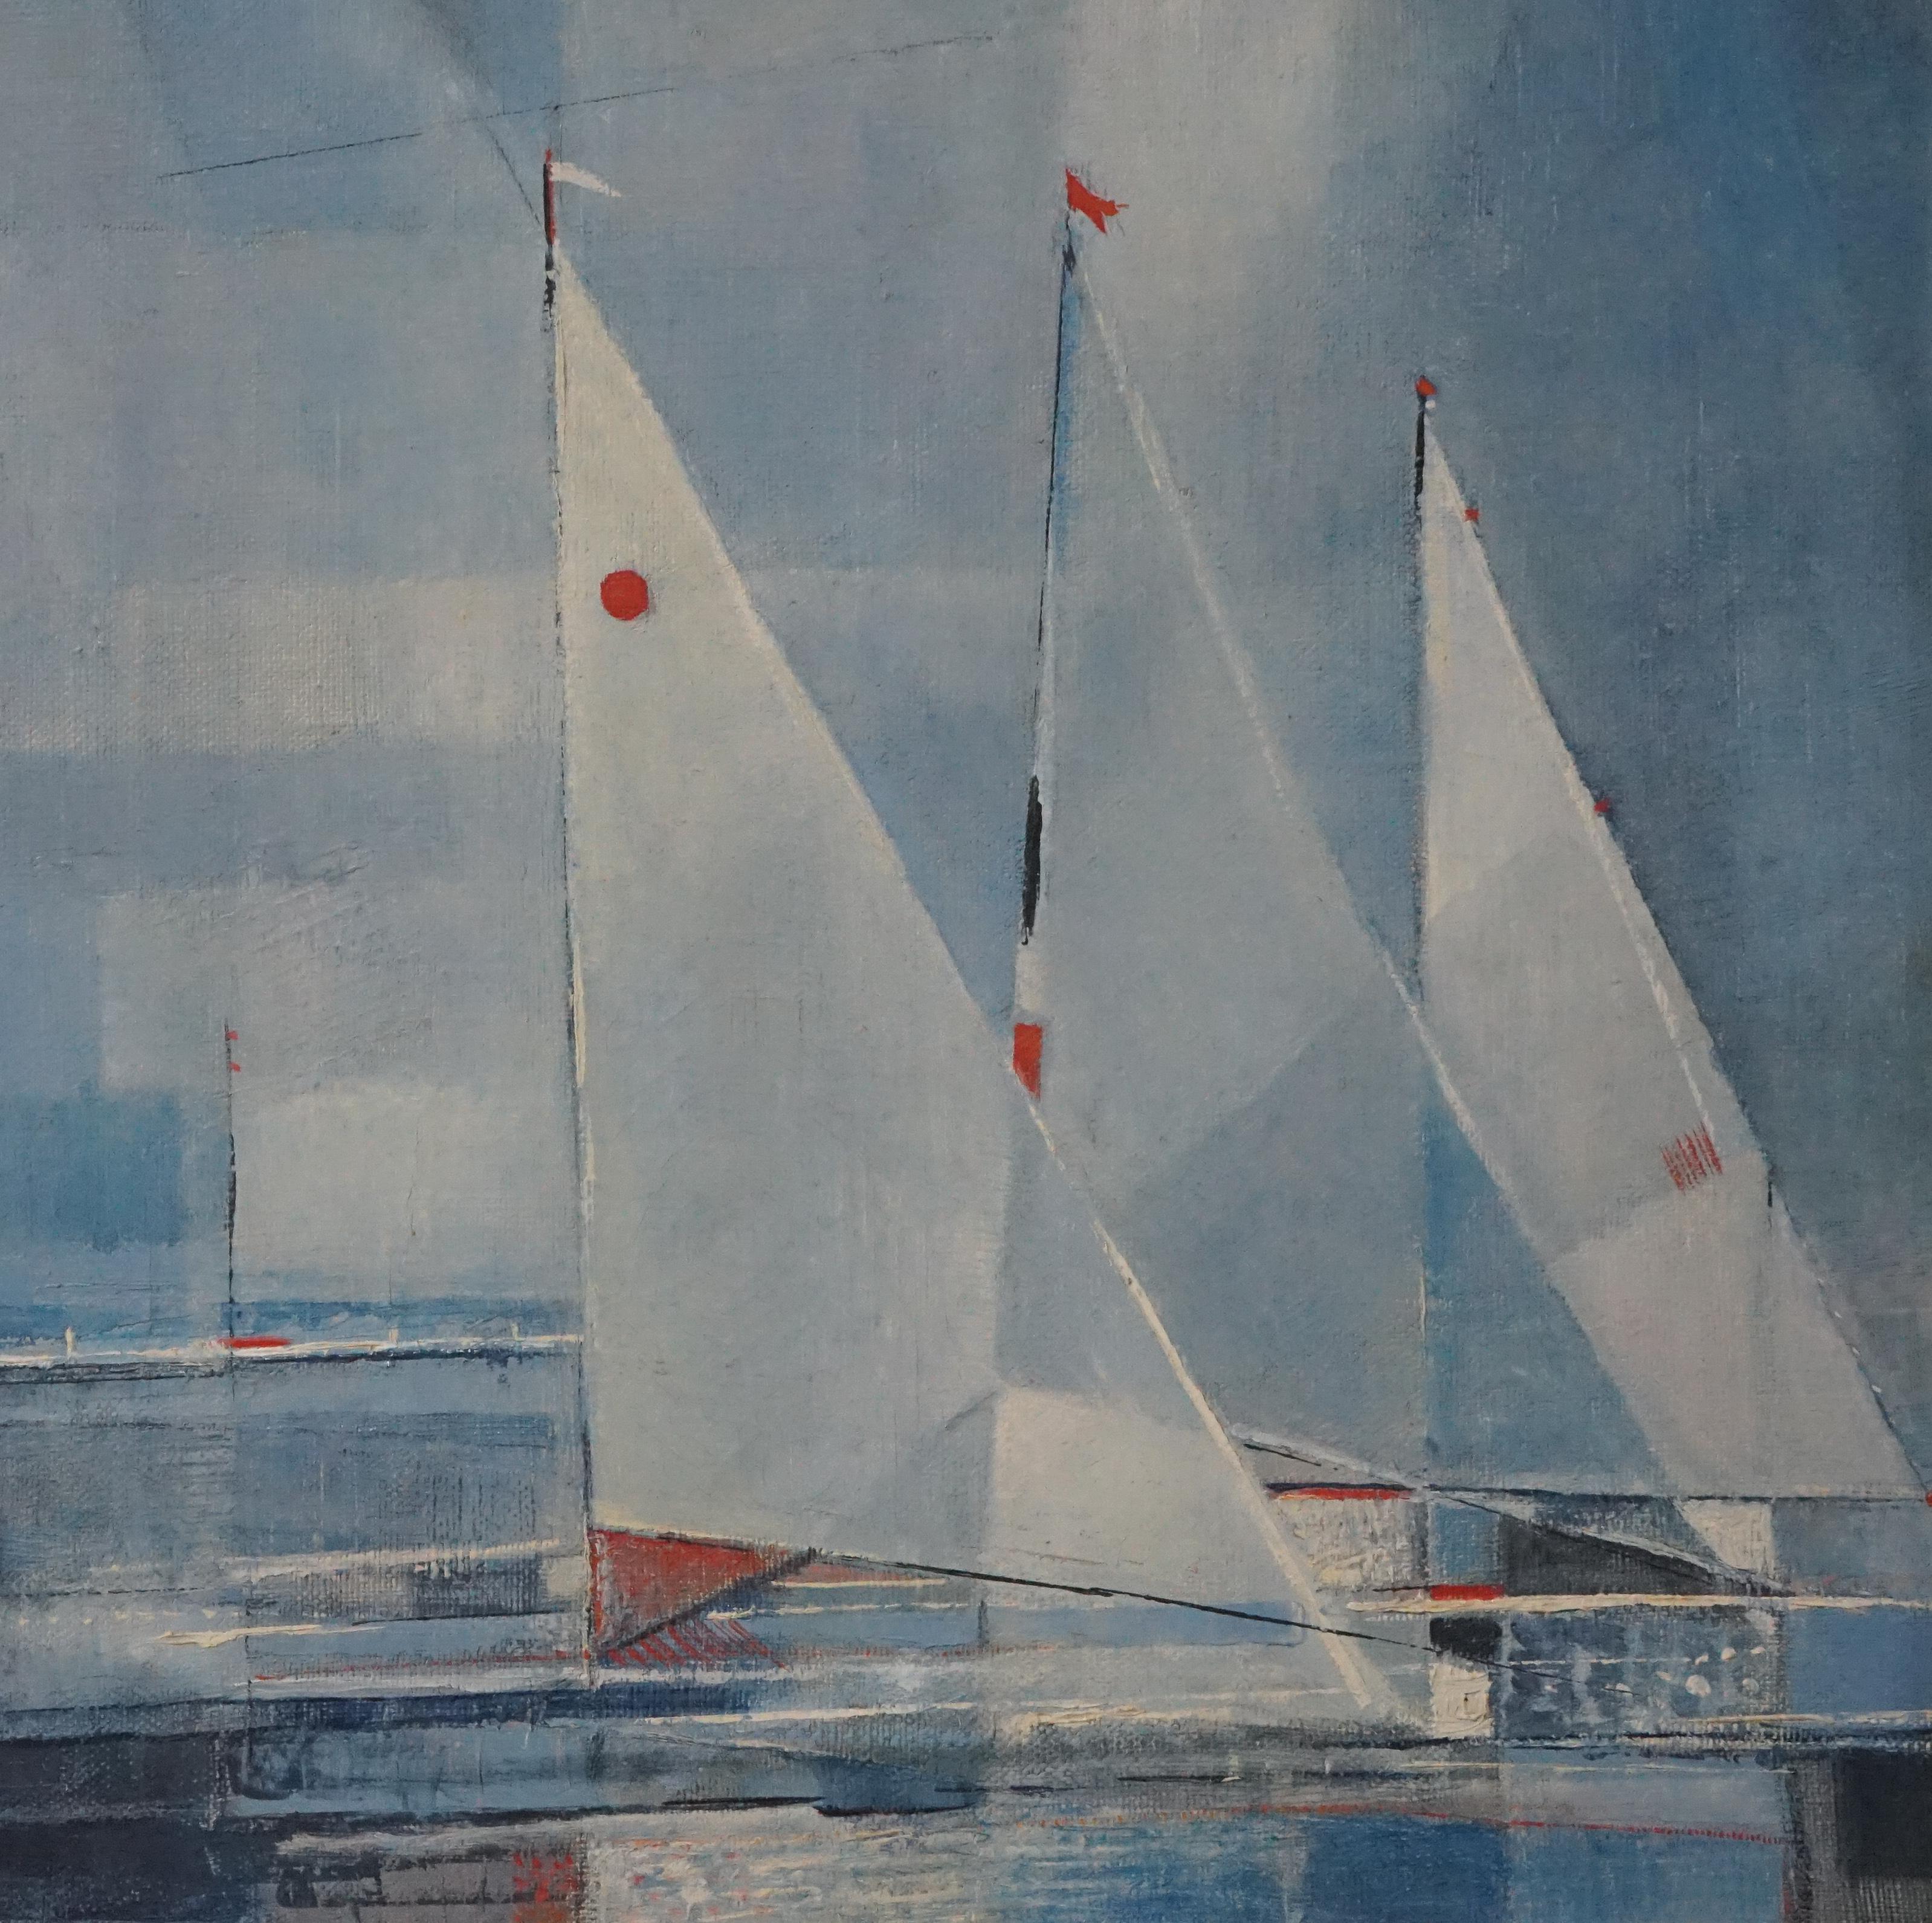 1953 American Geometric Abstract Yachts Racing  - Painting by William Charles Palmer